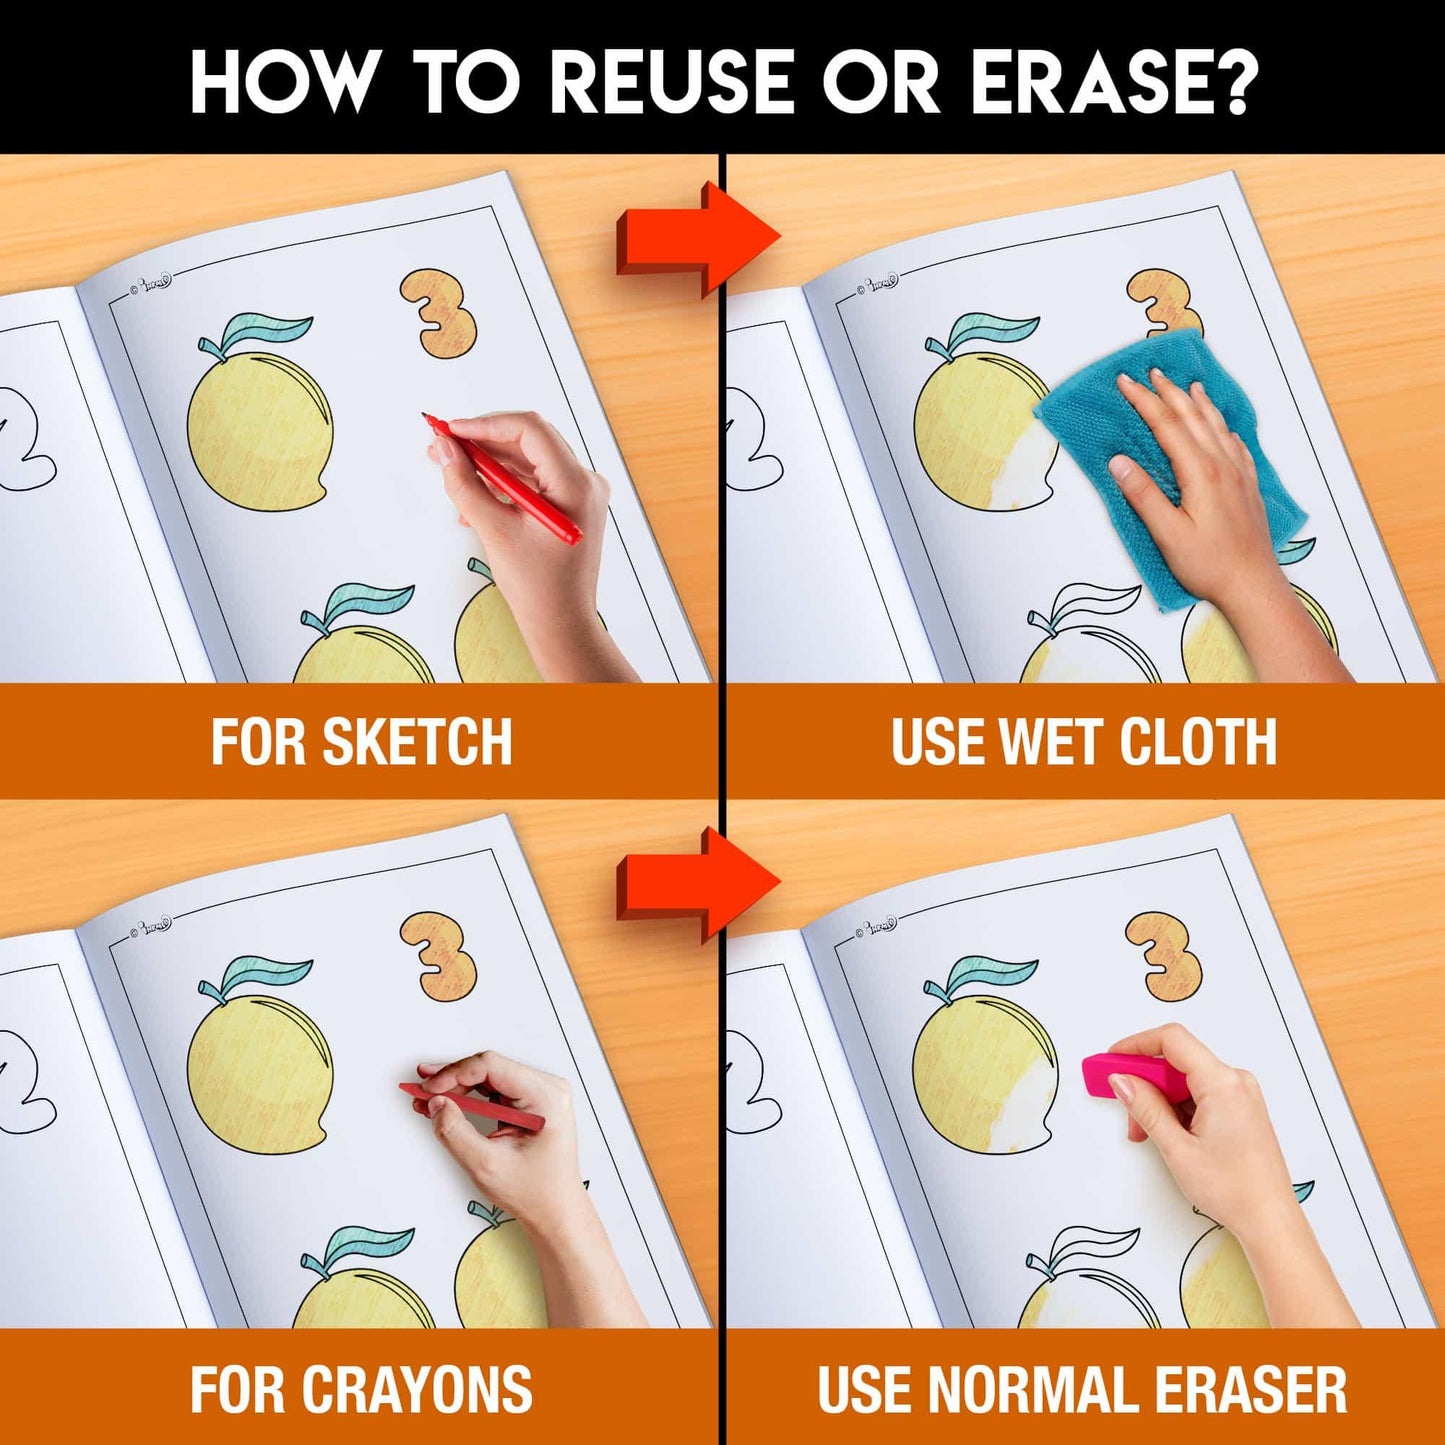 The image has an orange background with four pictures demonstrating how to reuse or erase: the first picture depicts sketching on the sheet, the second shows using a wet cloth to remove sketches, the third image displays crayons colouring on the sheet, and the fourth image illustrates erasing crayons with a regular eraser.